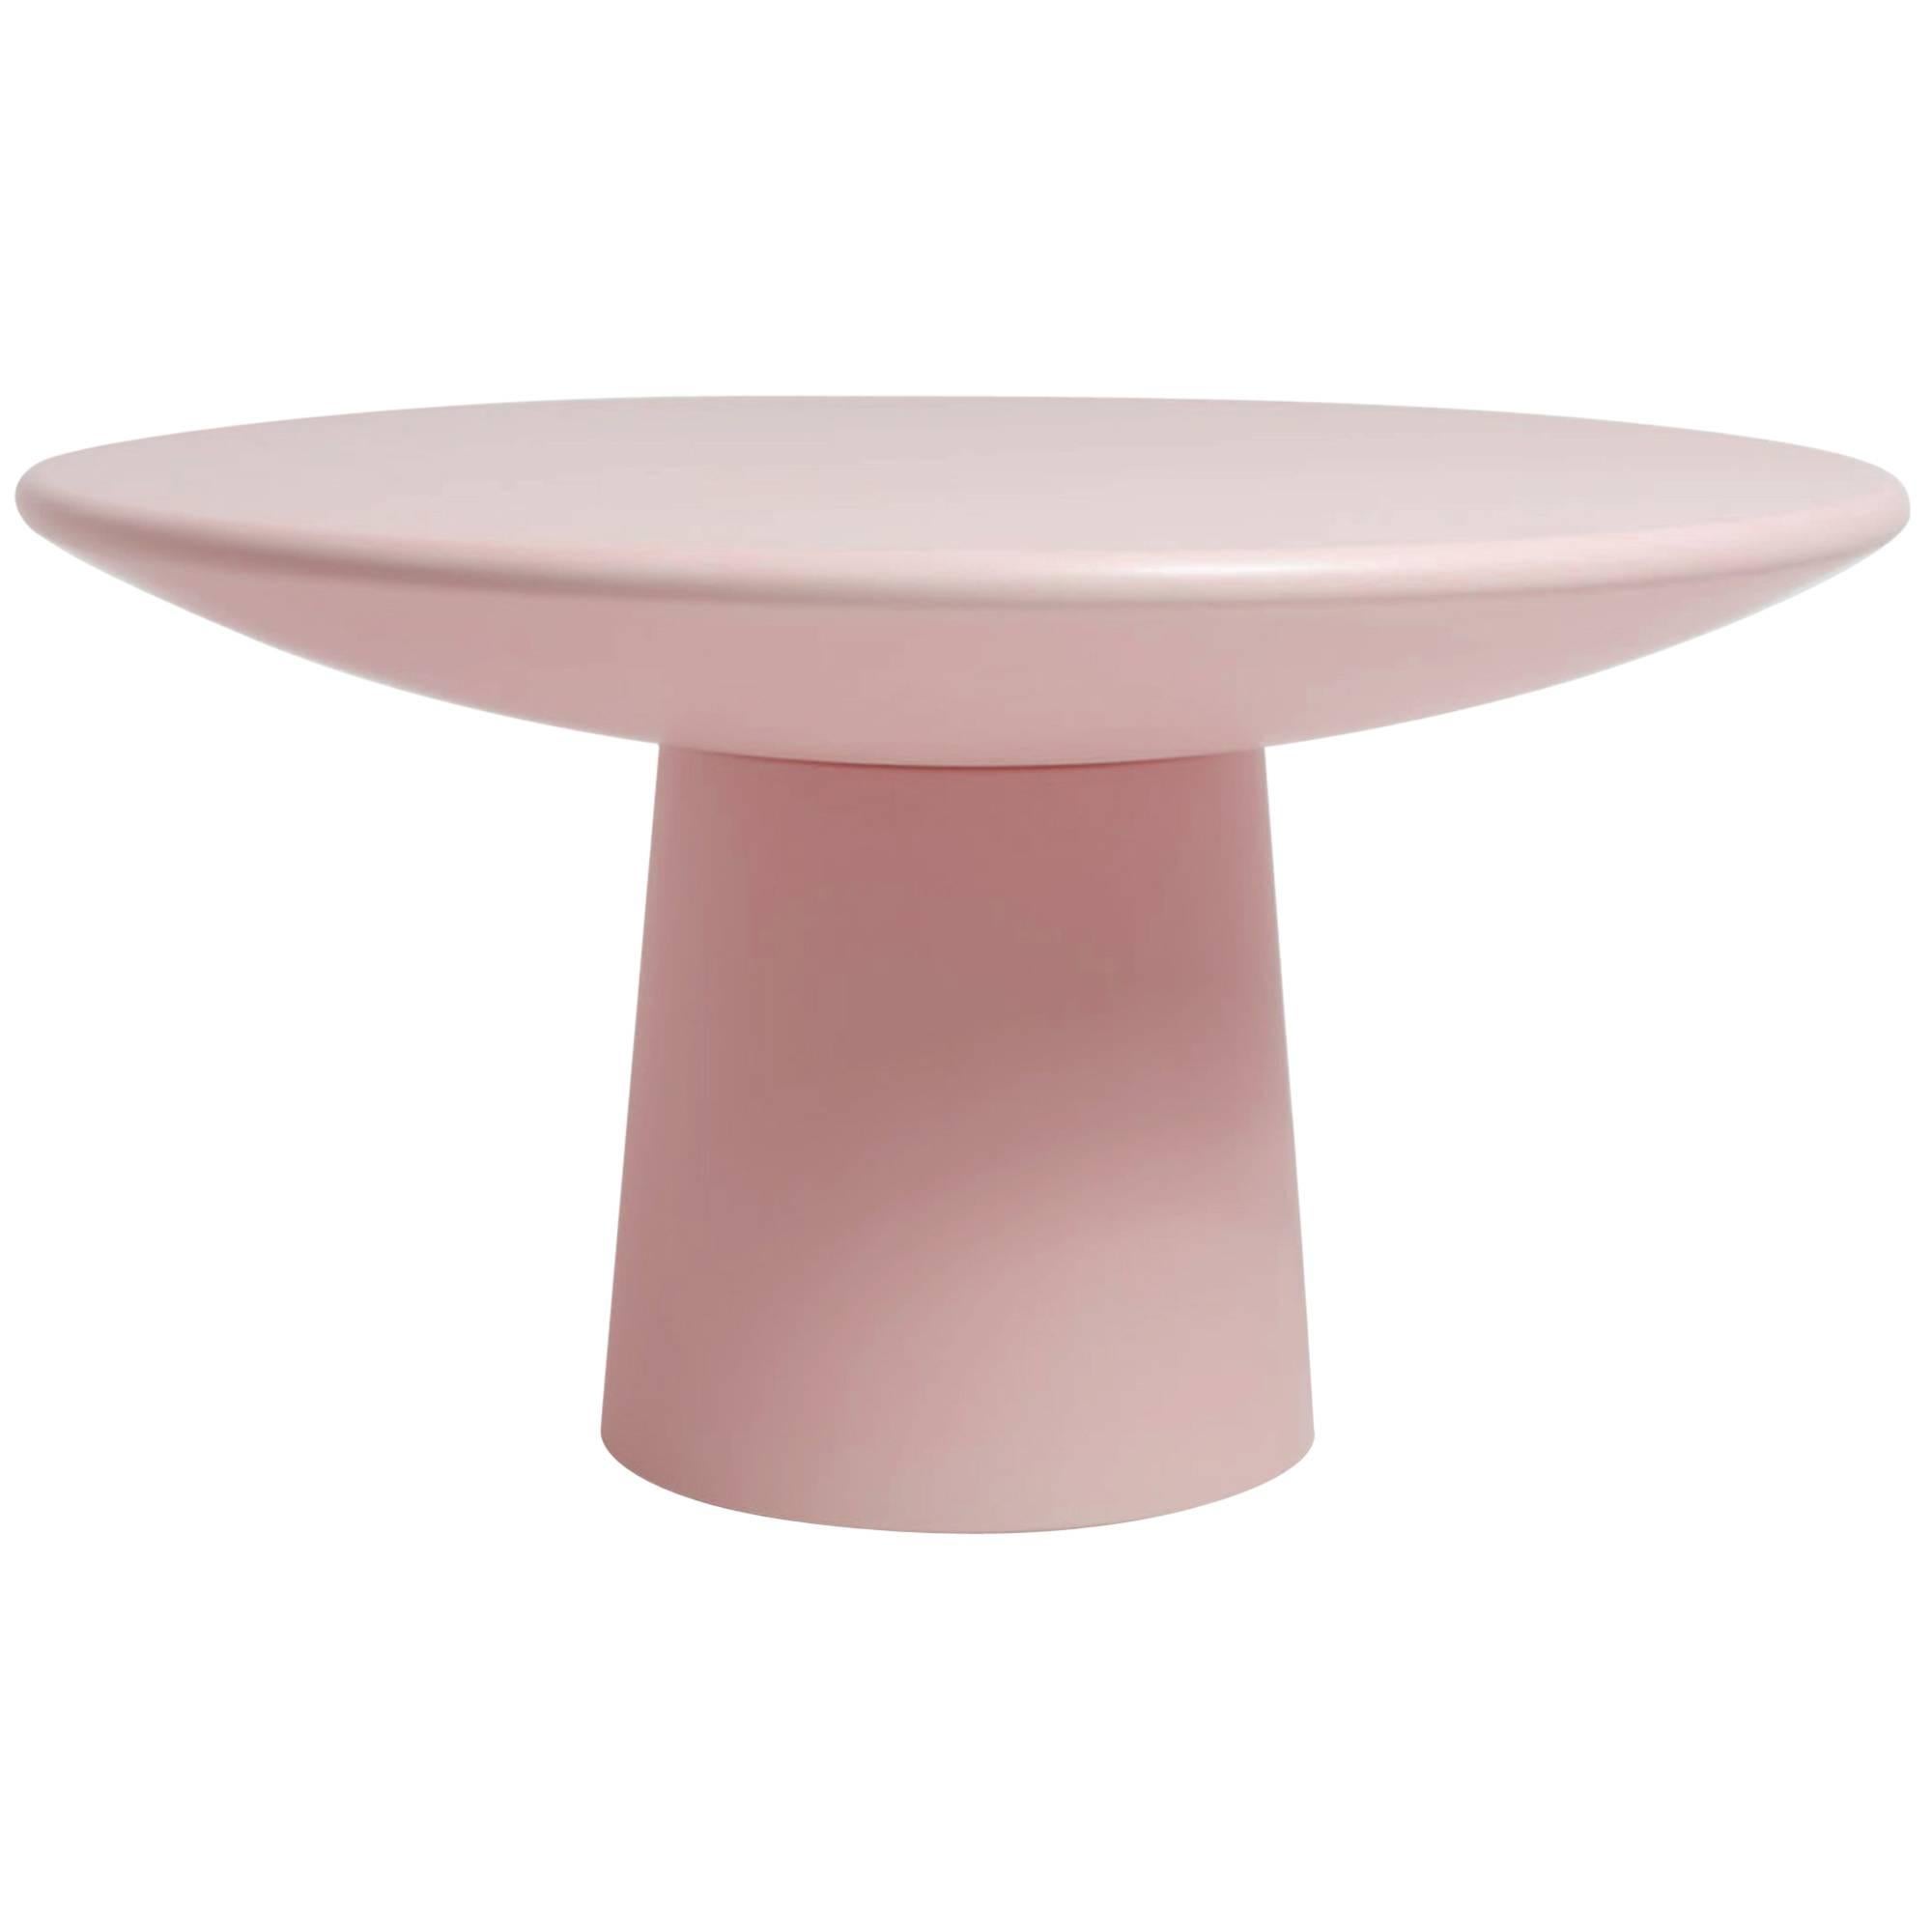 Faye Toogood Roly Poly Dining Table For Sale